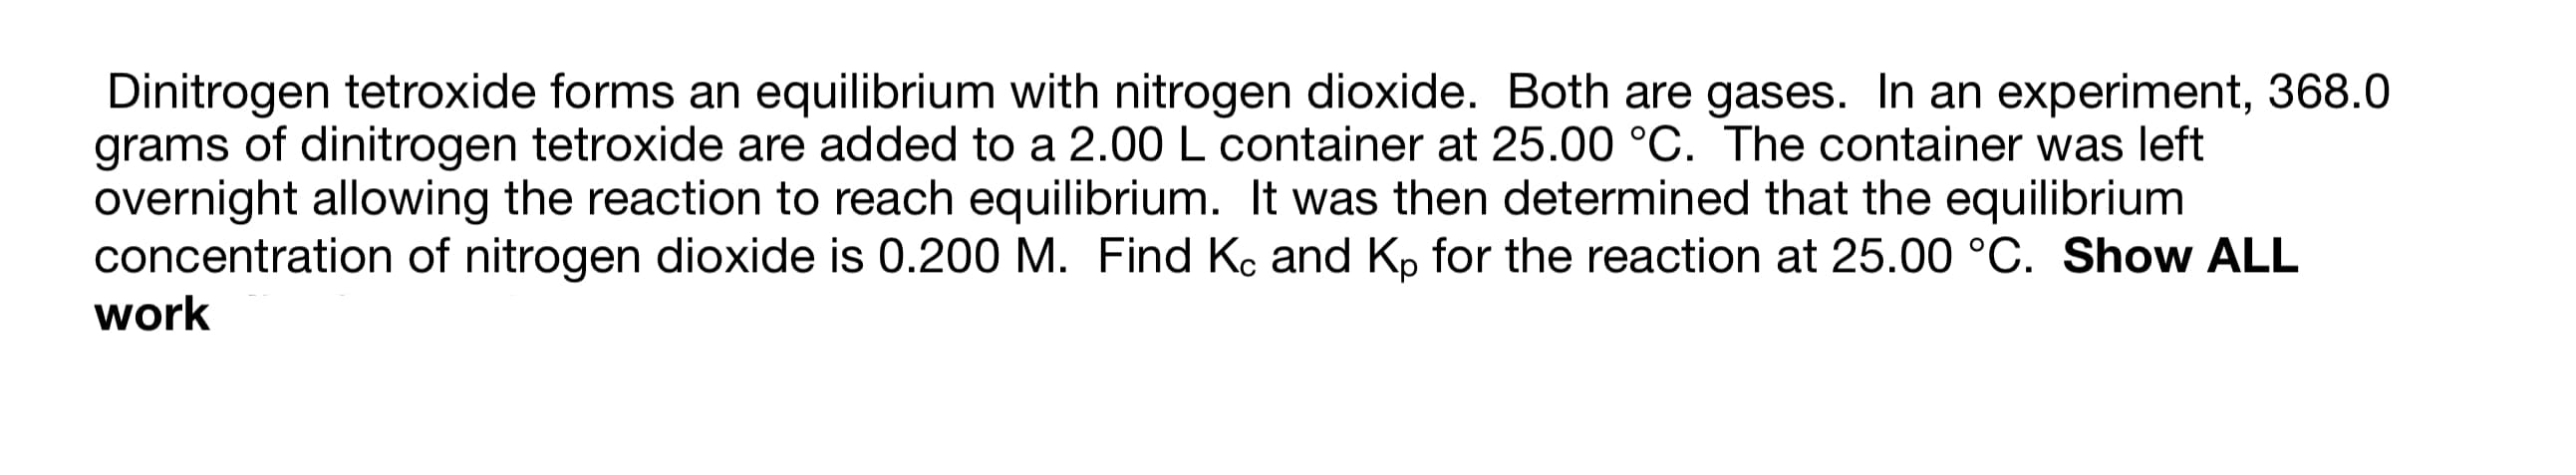 Dinitrogen tetroxide forms an equilibrium with nitrogen dioxide. Both are gases. In an experiment, 368.0
grams of dinitrogen tetroxide are added to a 2.00 L container at 25.00 °C. The container was left
overnight allowing the reaction to reach equilibrium. It was then determined that the equilibrium
concentration of nitrogen dioxide is 0.200 M. Find Kc and Kp for the reaction at 25.00 °C. Show ALL
work
